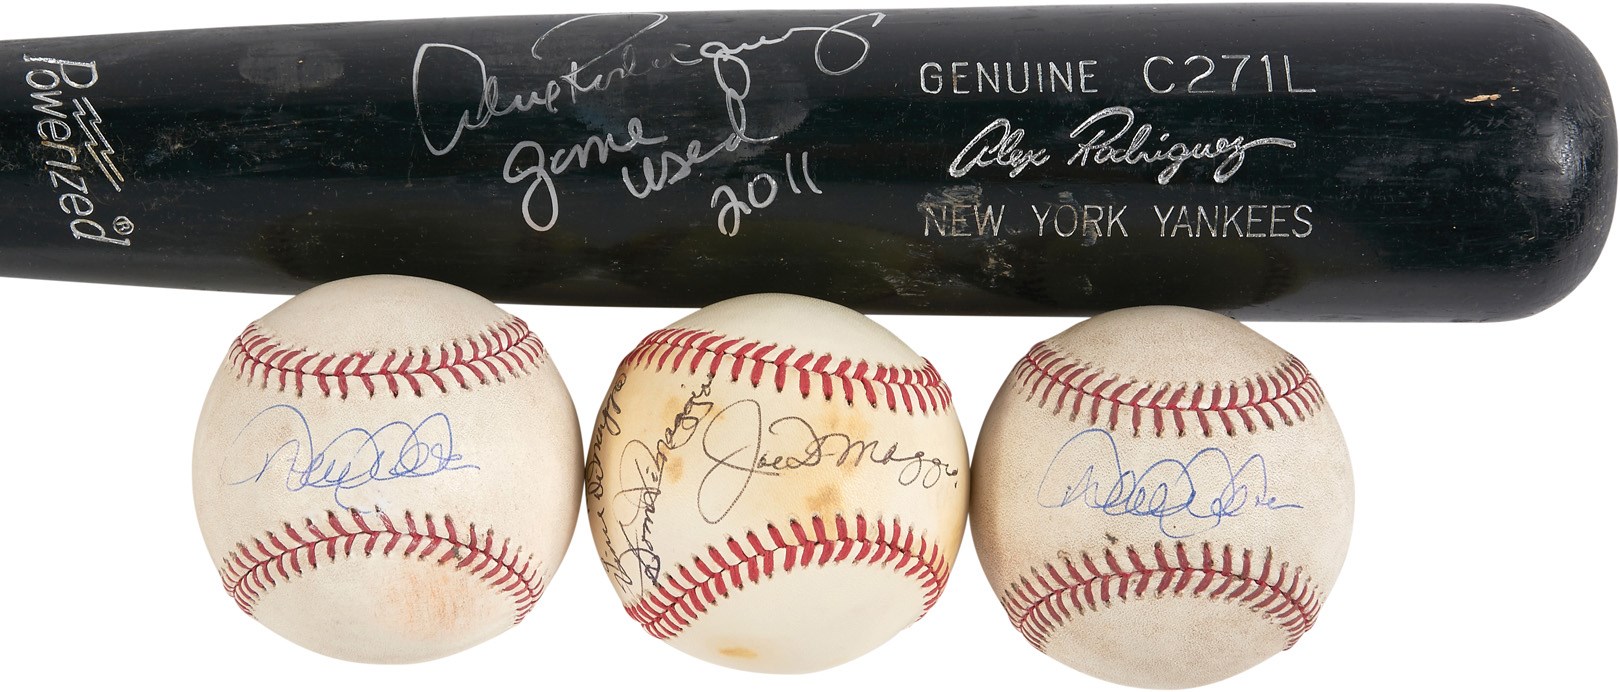 NY Yankees, Giants & Mets - Yankees & Dodgers Legends Signed Baseballs and Game Used Collection (11)